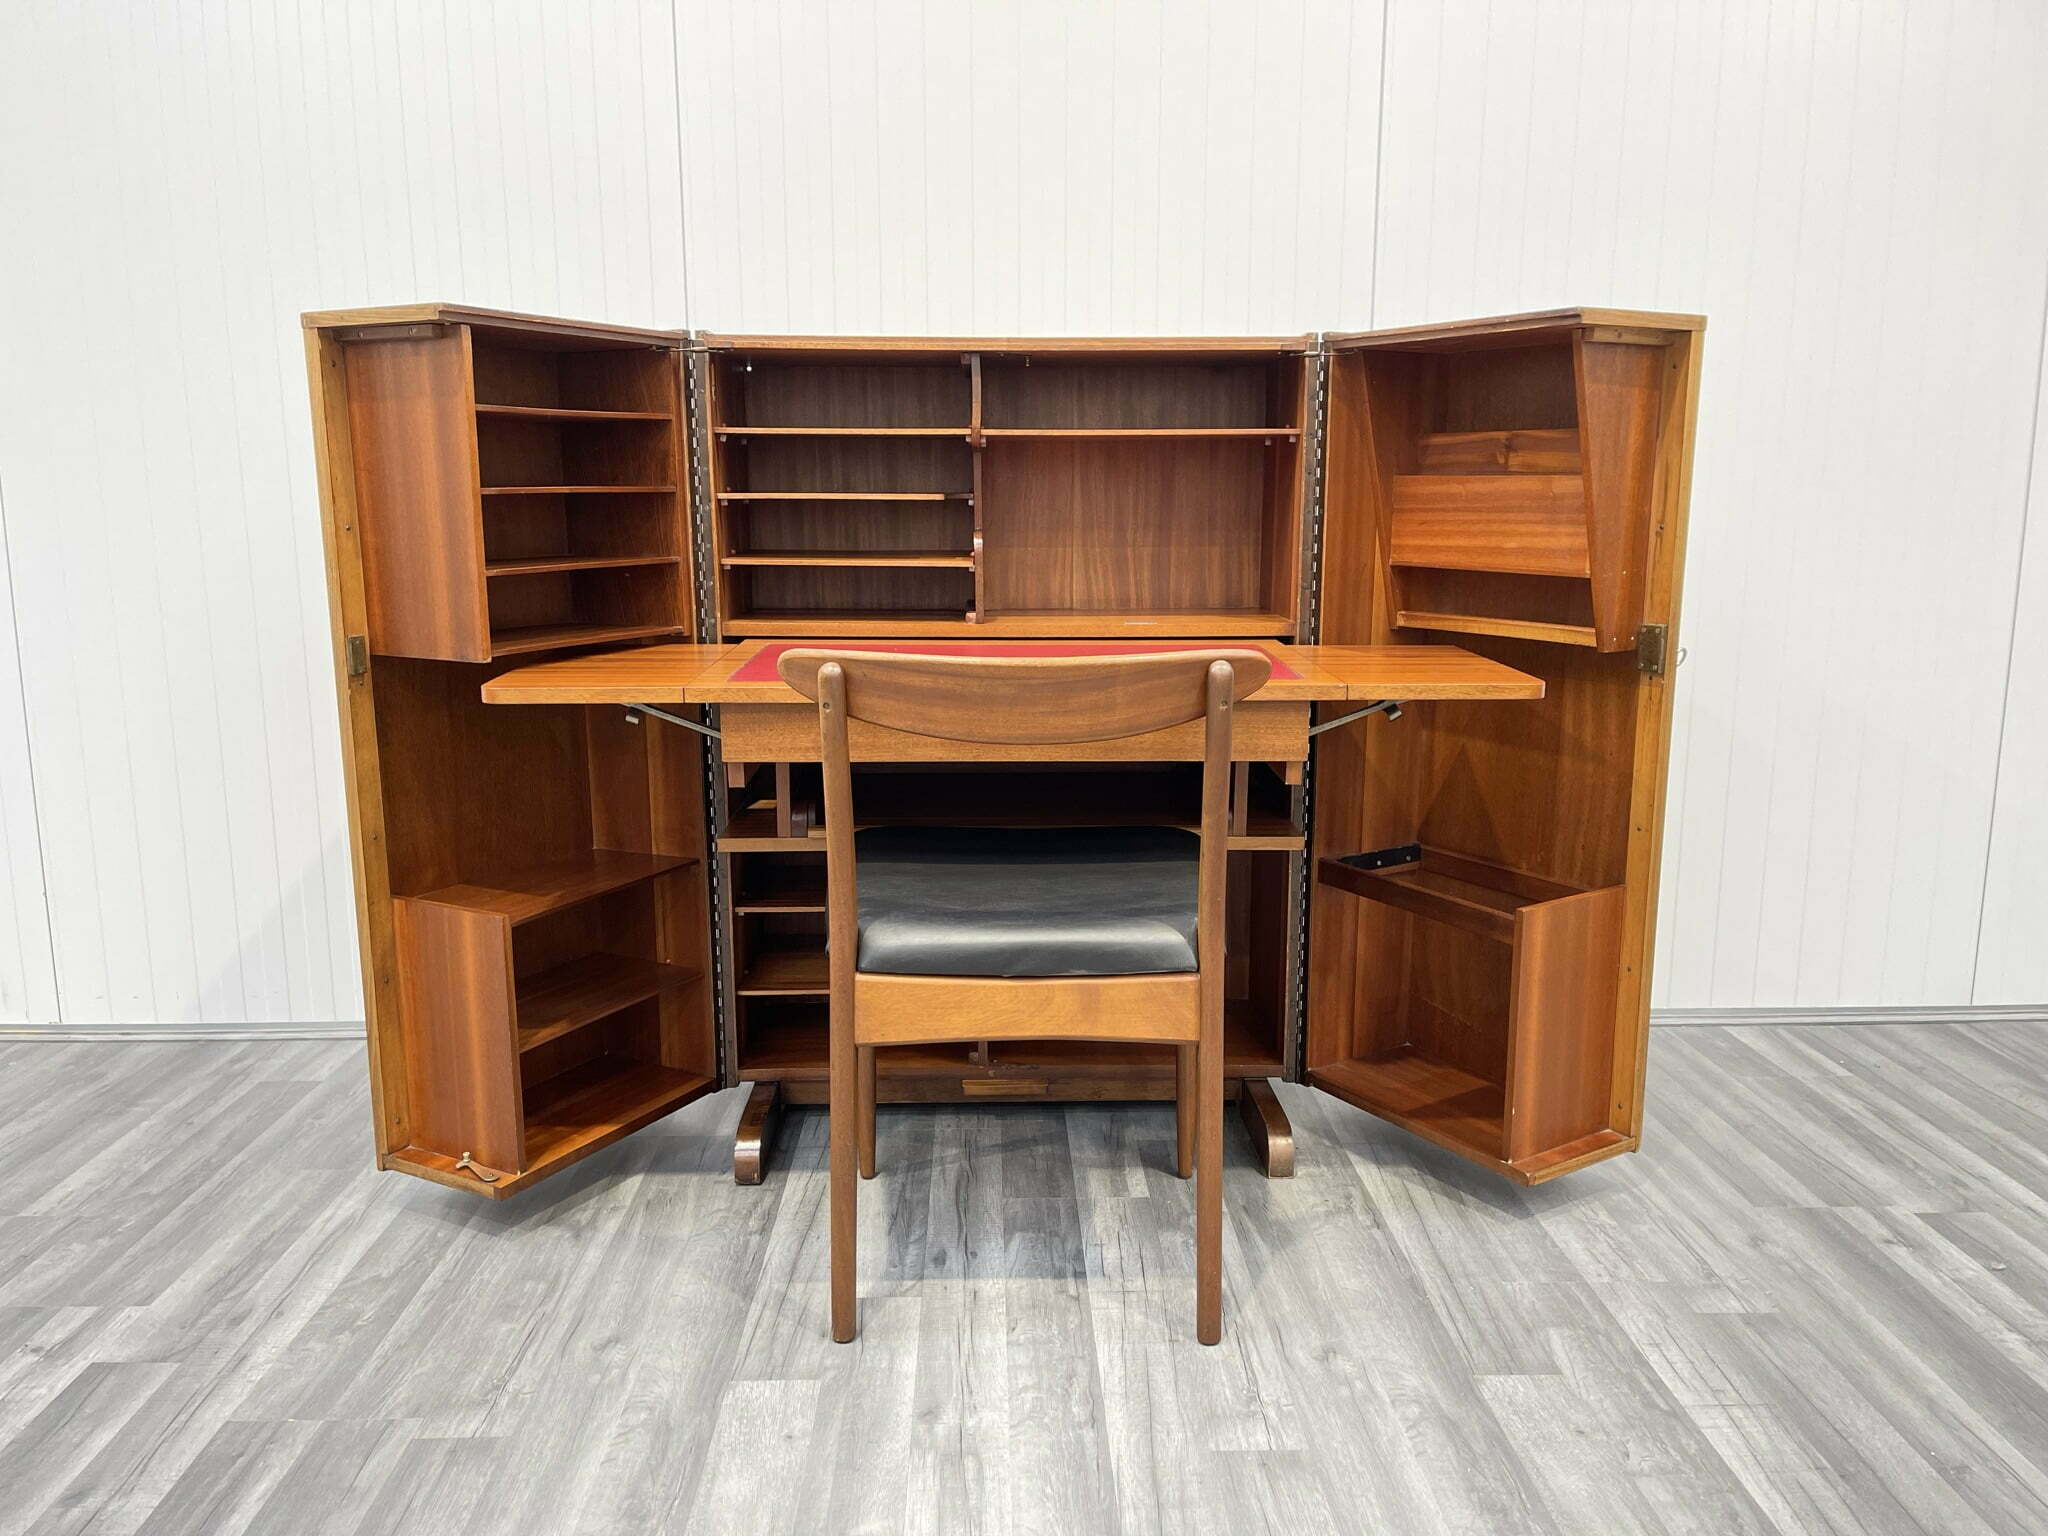 teak mid century office in a box by Newcraft of London